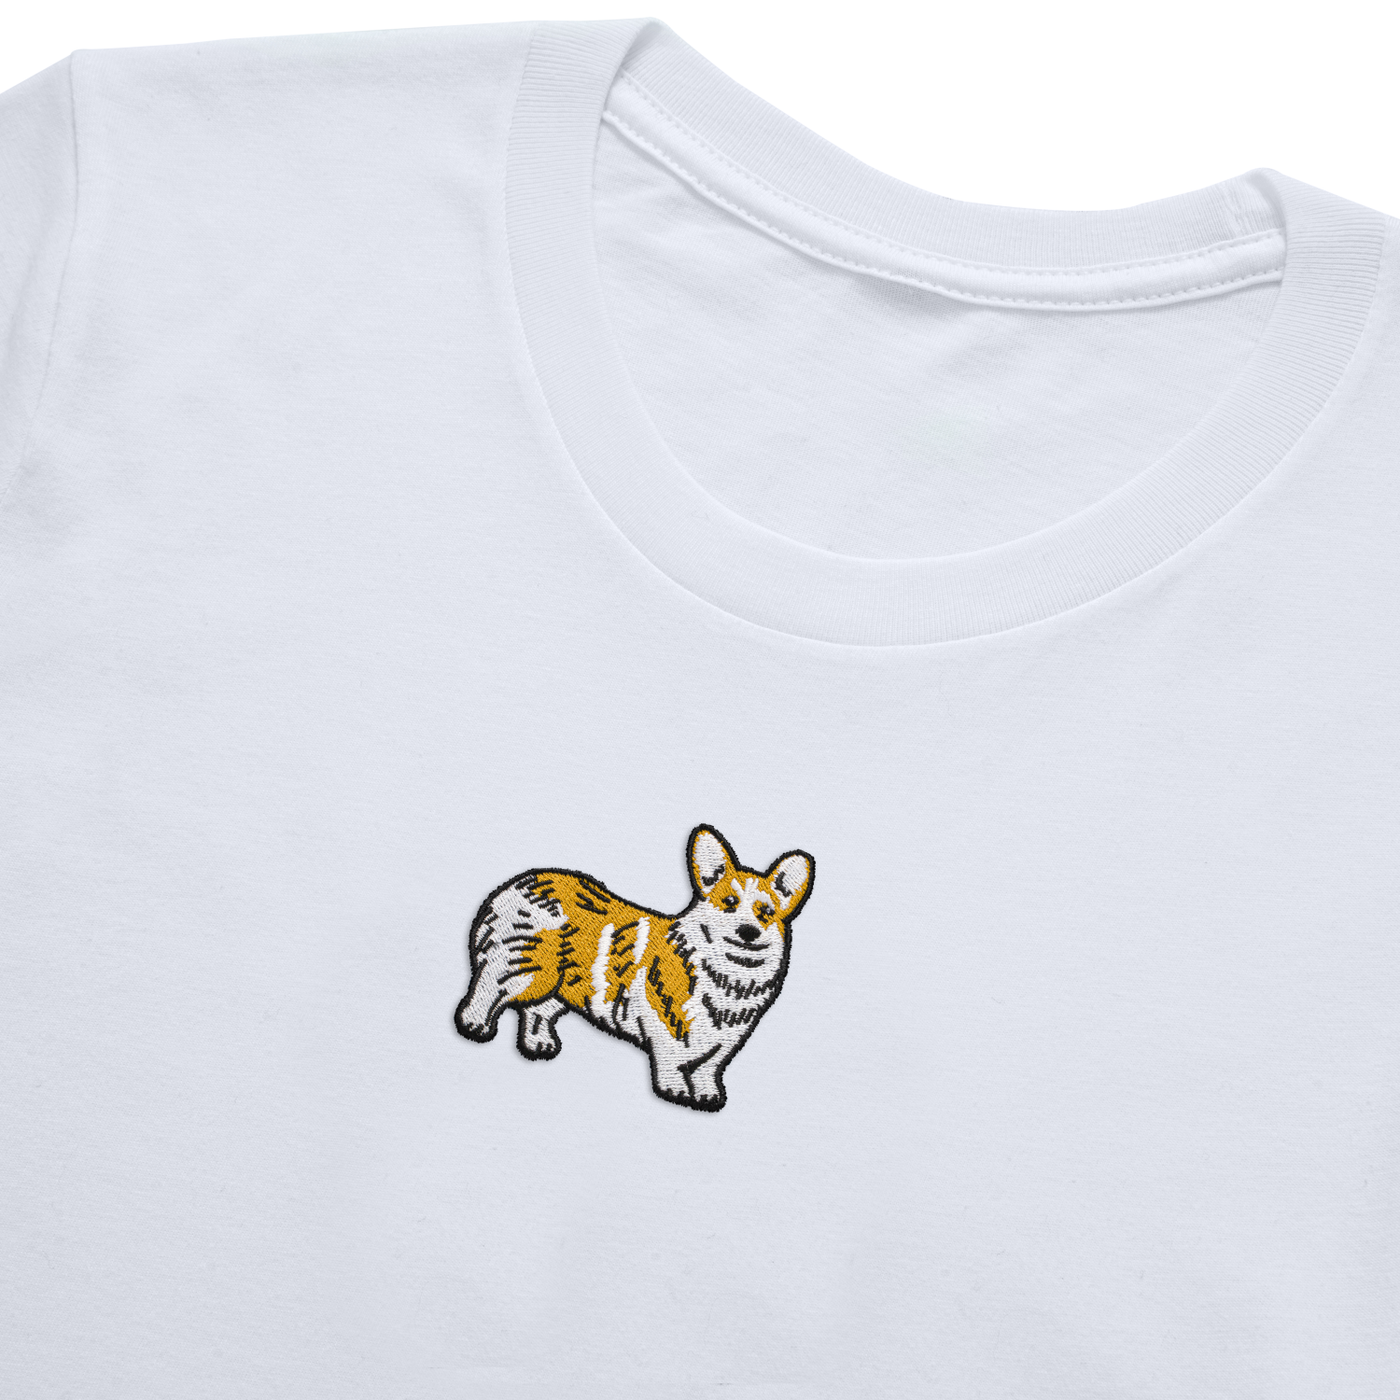 Bobby's Planet Women's Embroidered Corgi T-Shirt from Paws Dog Cat Animals Collection in White Color#color_white